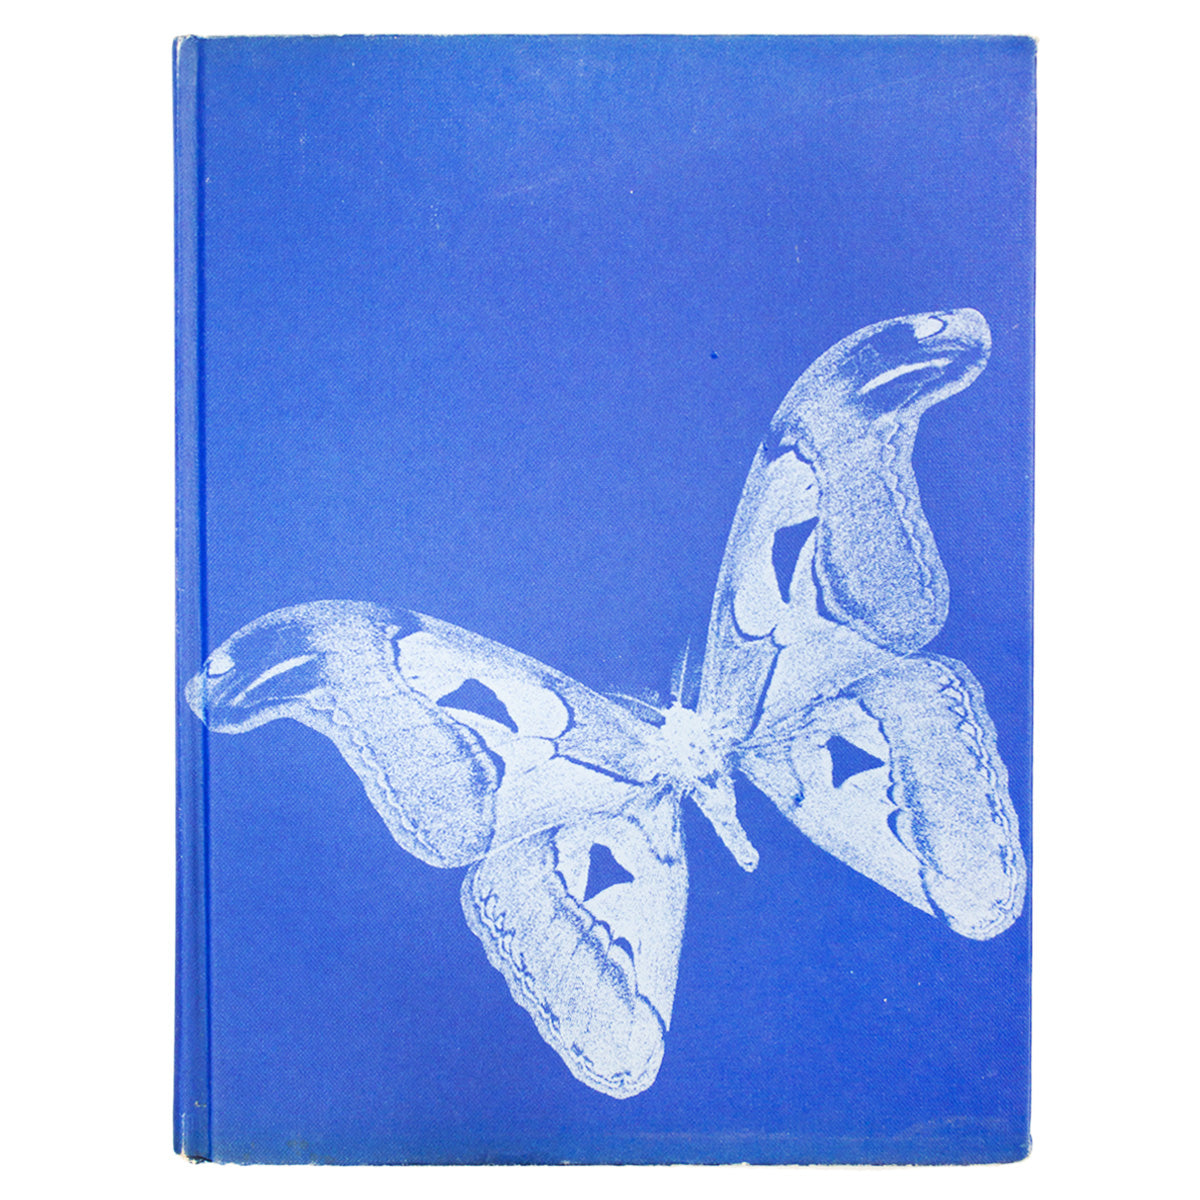 Book; The Dictionary of Butterflies and Moths in color